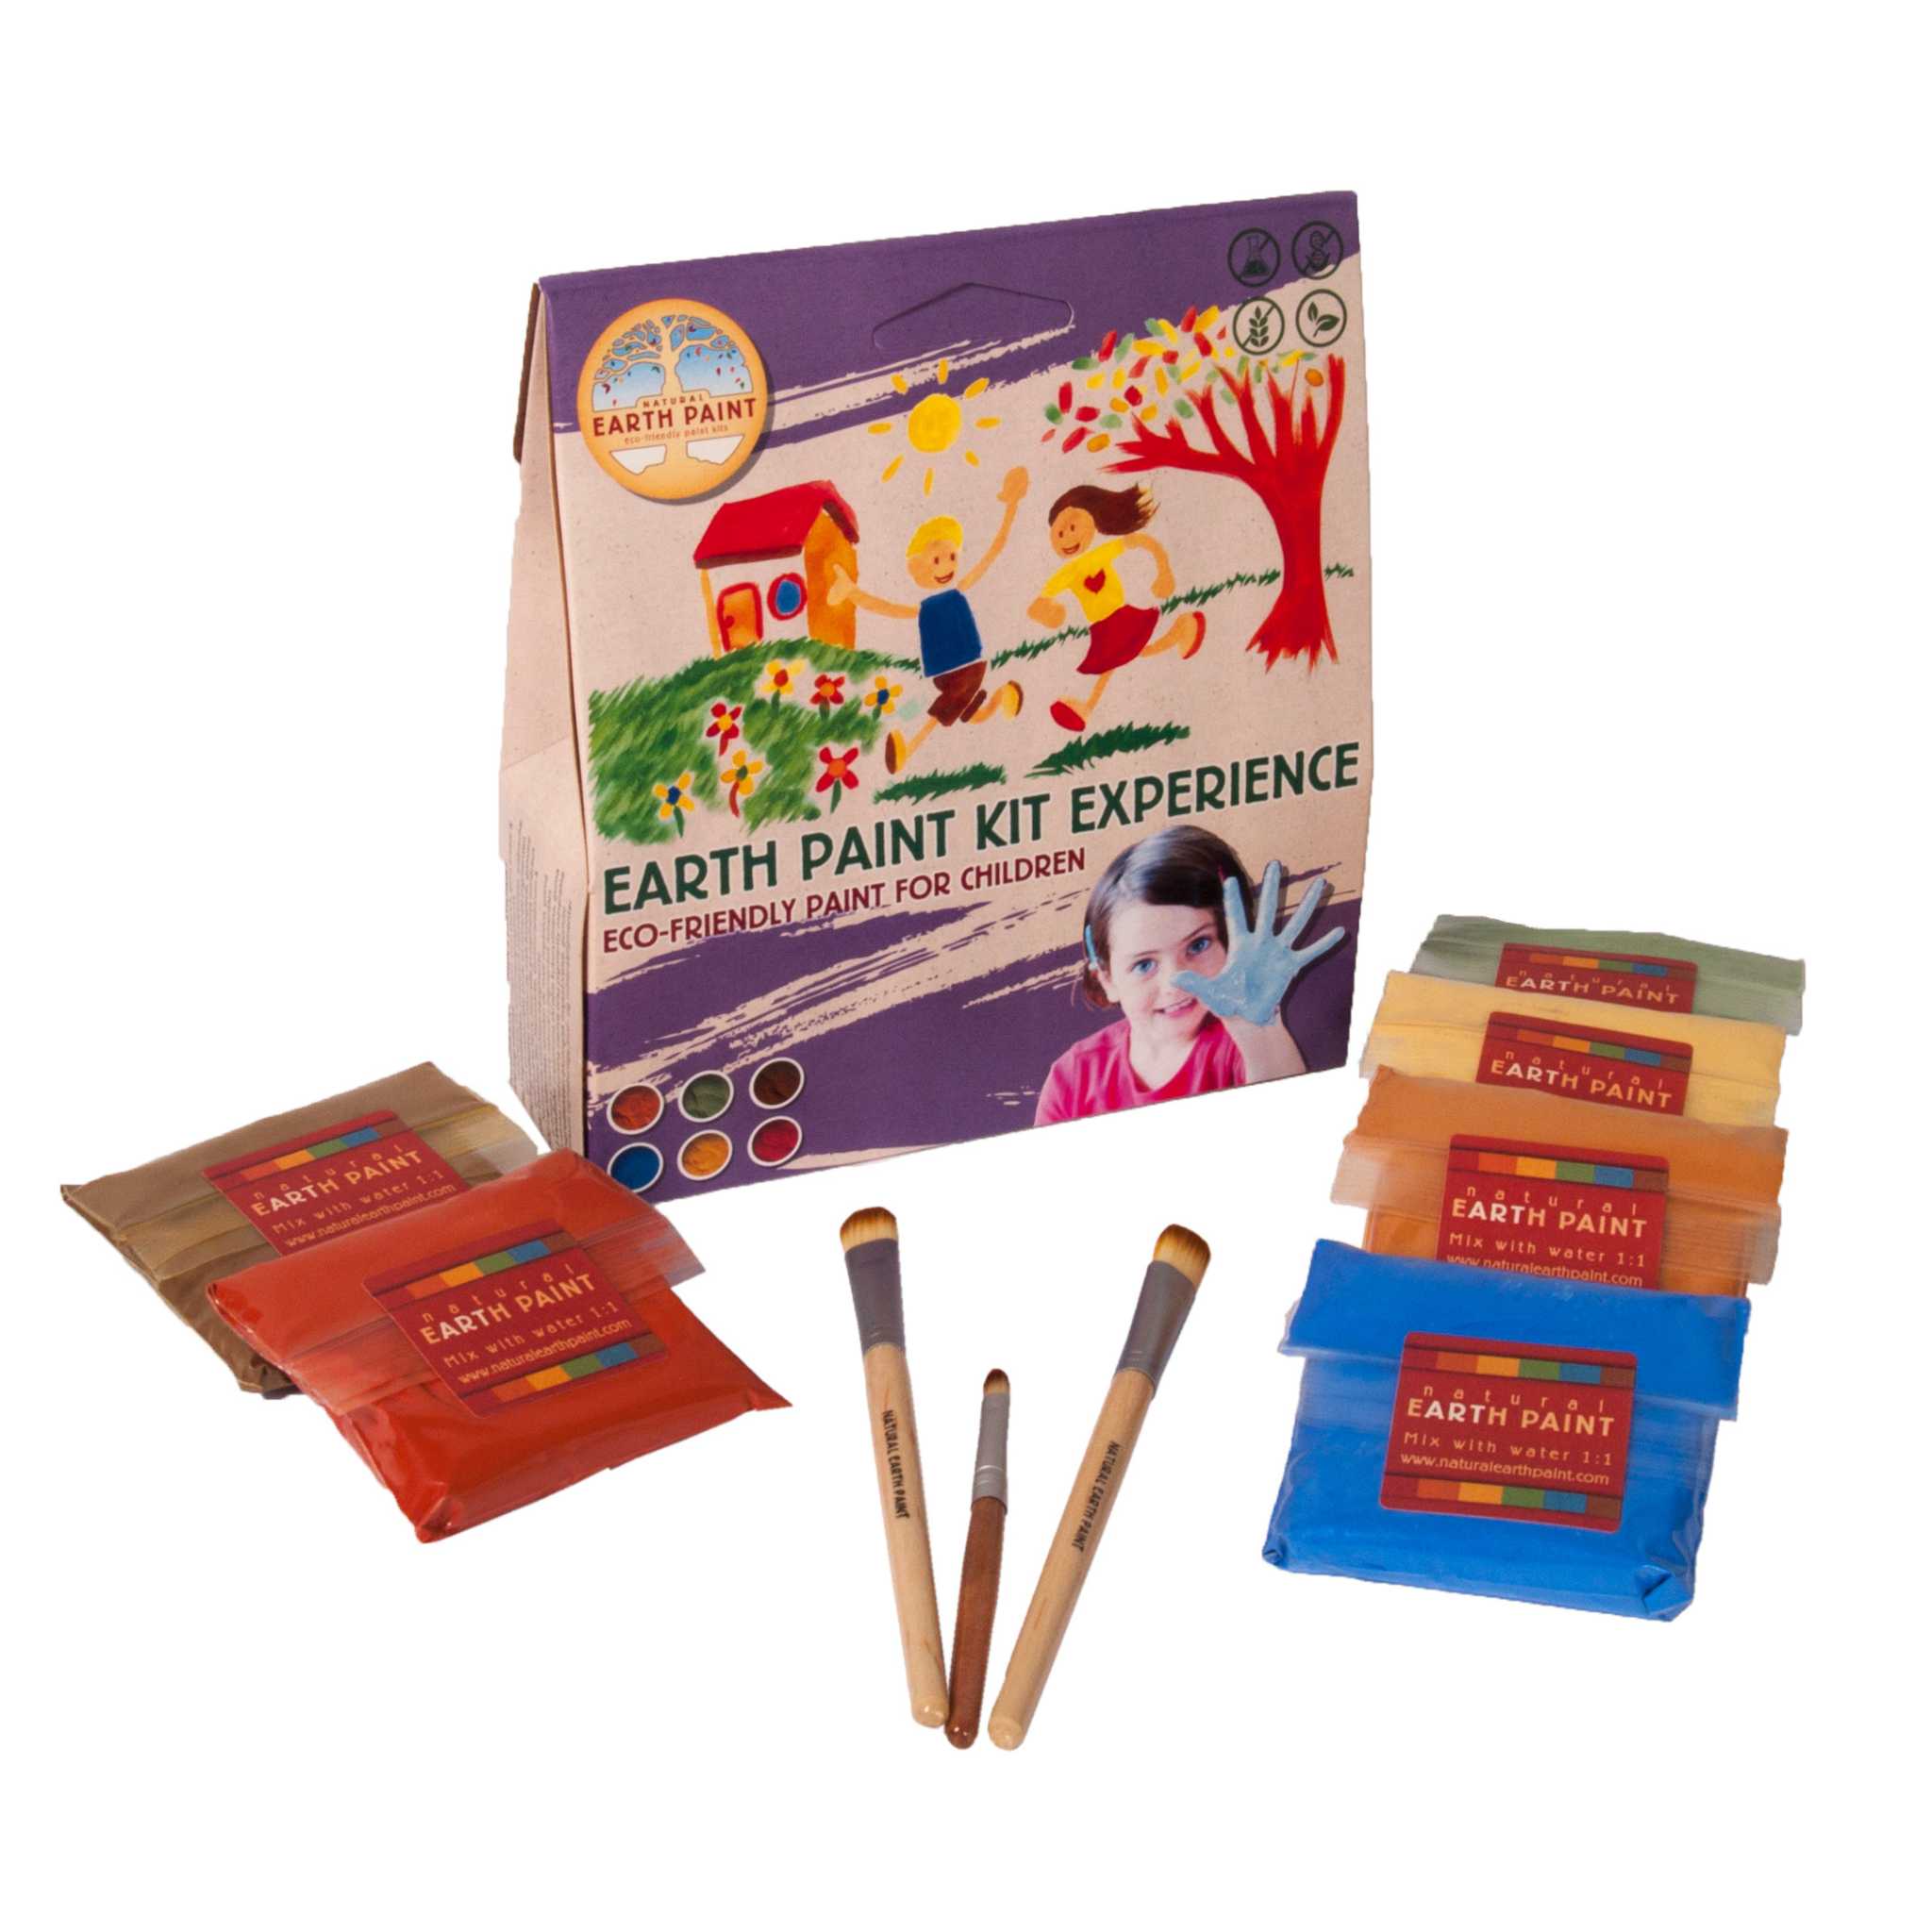 Natural Earth Paint Kit Experience - Showing Box and Contents